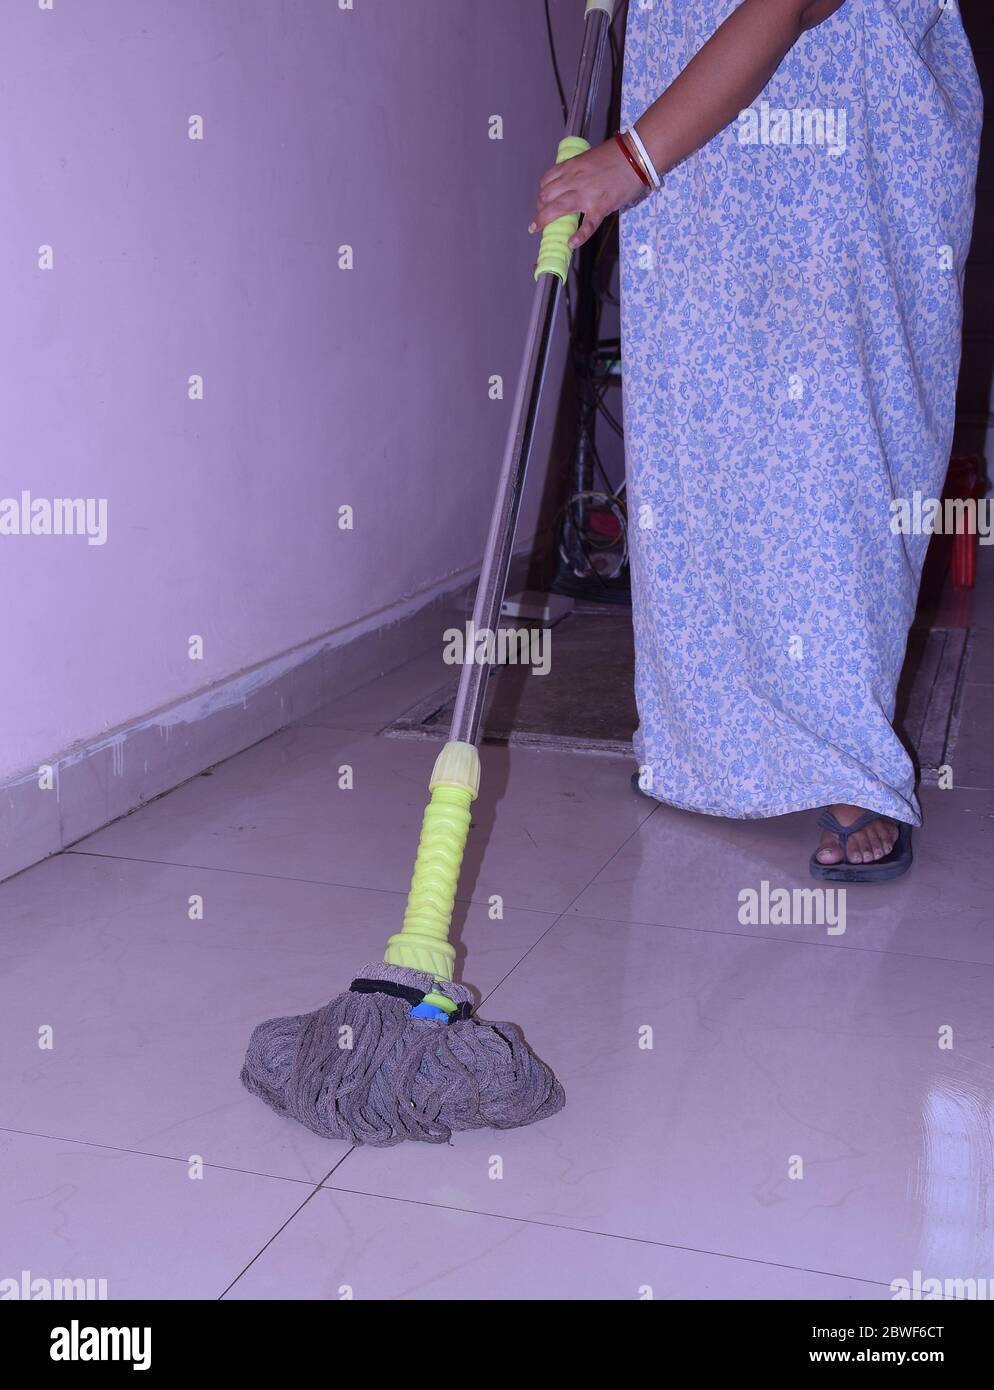 An Indian cleaner mopping or cleaning floor Stock Photo